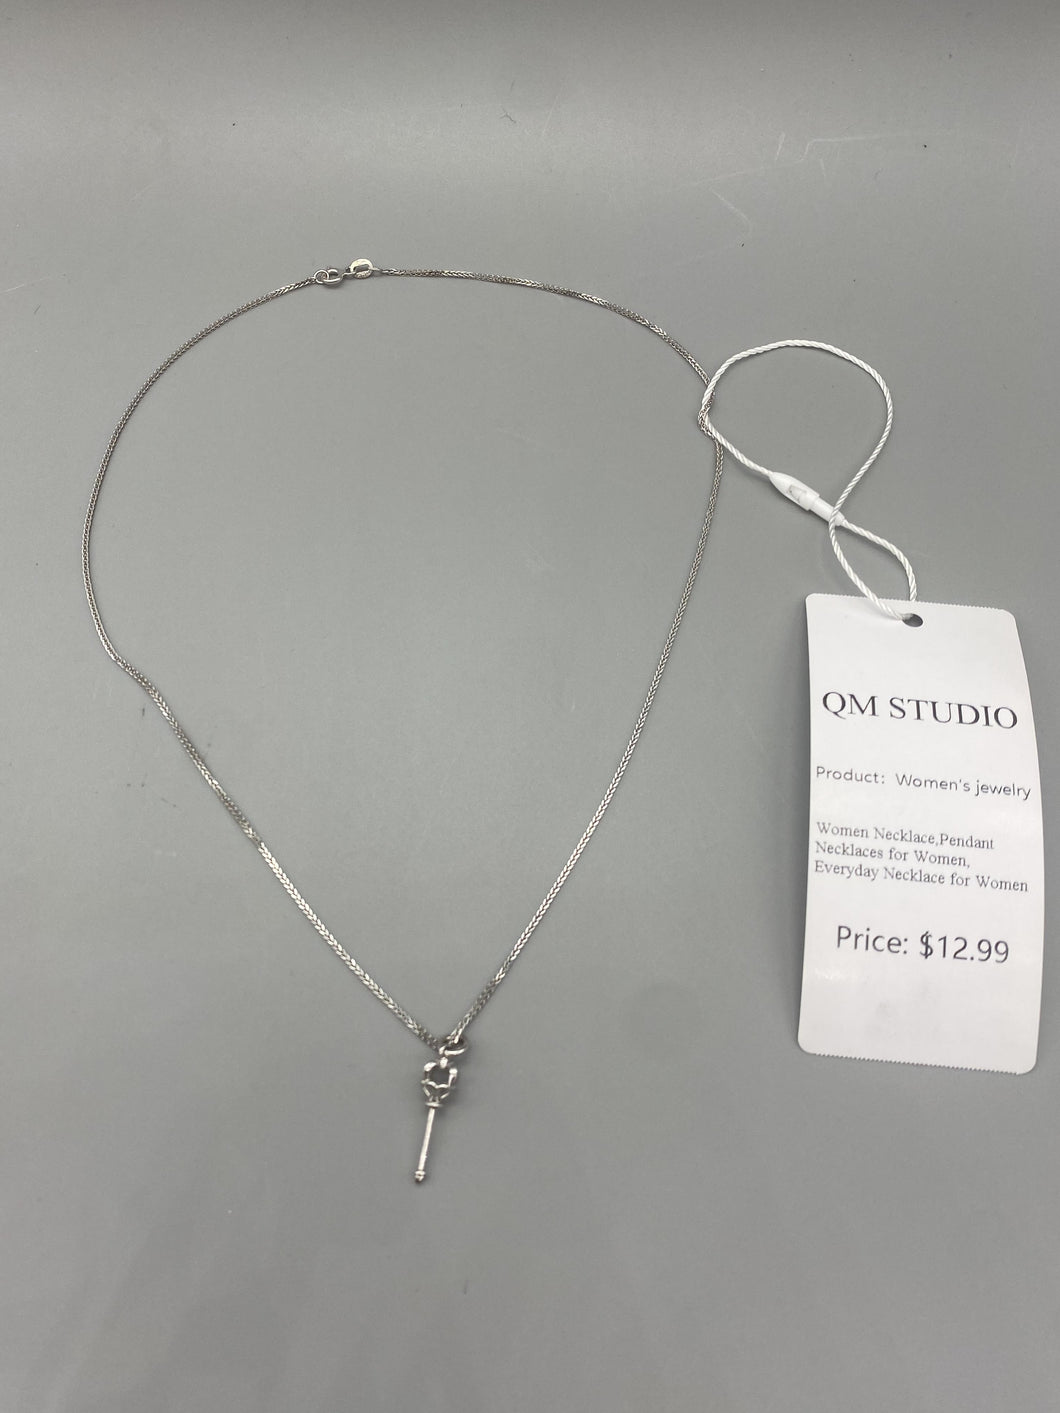 QM STUDIO Women's jewelry,Scepter Magic Key Personalized Pendant Necklace,925 Sterling Silver Thin Cable Link Chain Necklace ,Curb Link Chain Necklace, Men & Women, Super Thin & Strong - Friendly Price & Quality 20Inc